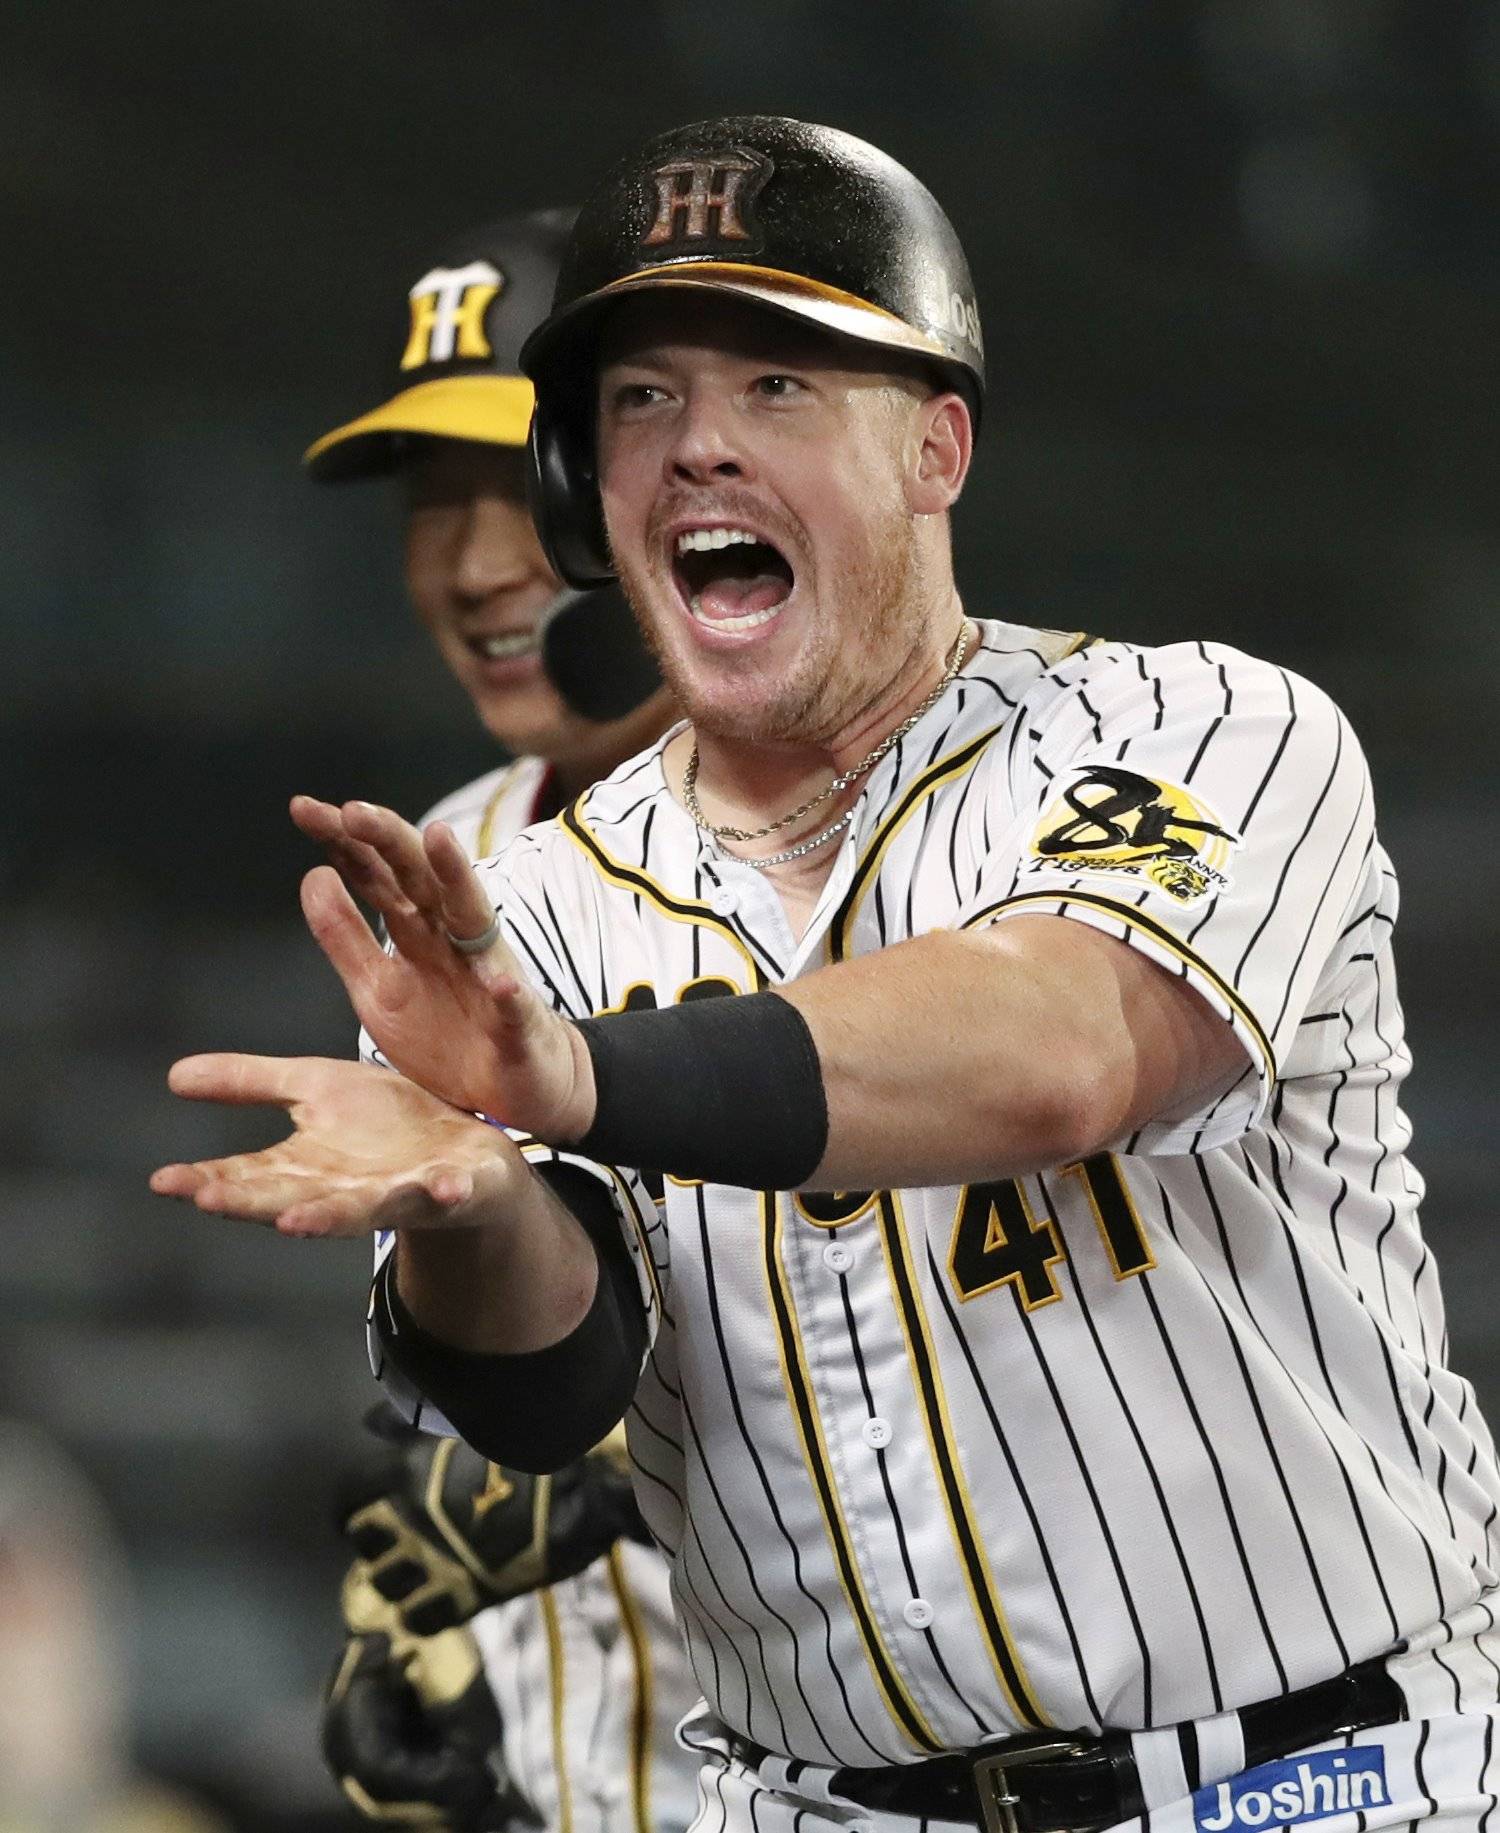 The Tigers' Justin Bour celebrates after hitting a home run against the Giants at Koshien Stadium in Nishinomiya, Hyogo Prefecture, on July 9. | KYODO